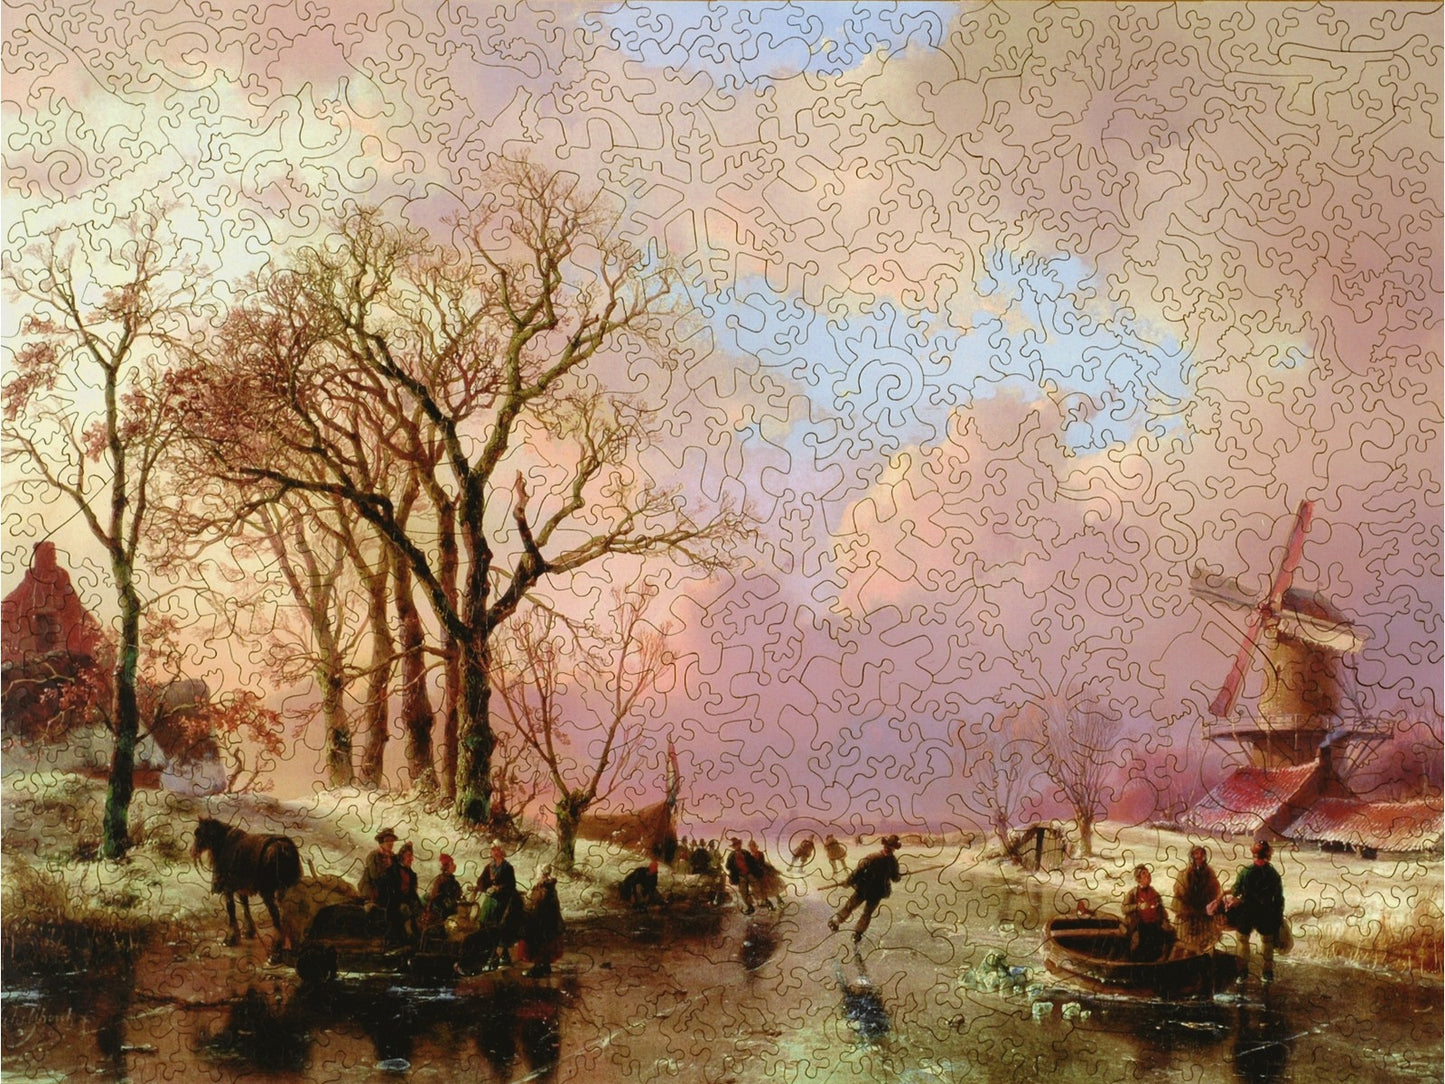 The front of the puzzle, Skating in Holland, which shows a winter landscape scene of people skating on a frozen river in the countryside of Holland.